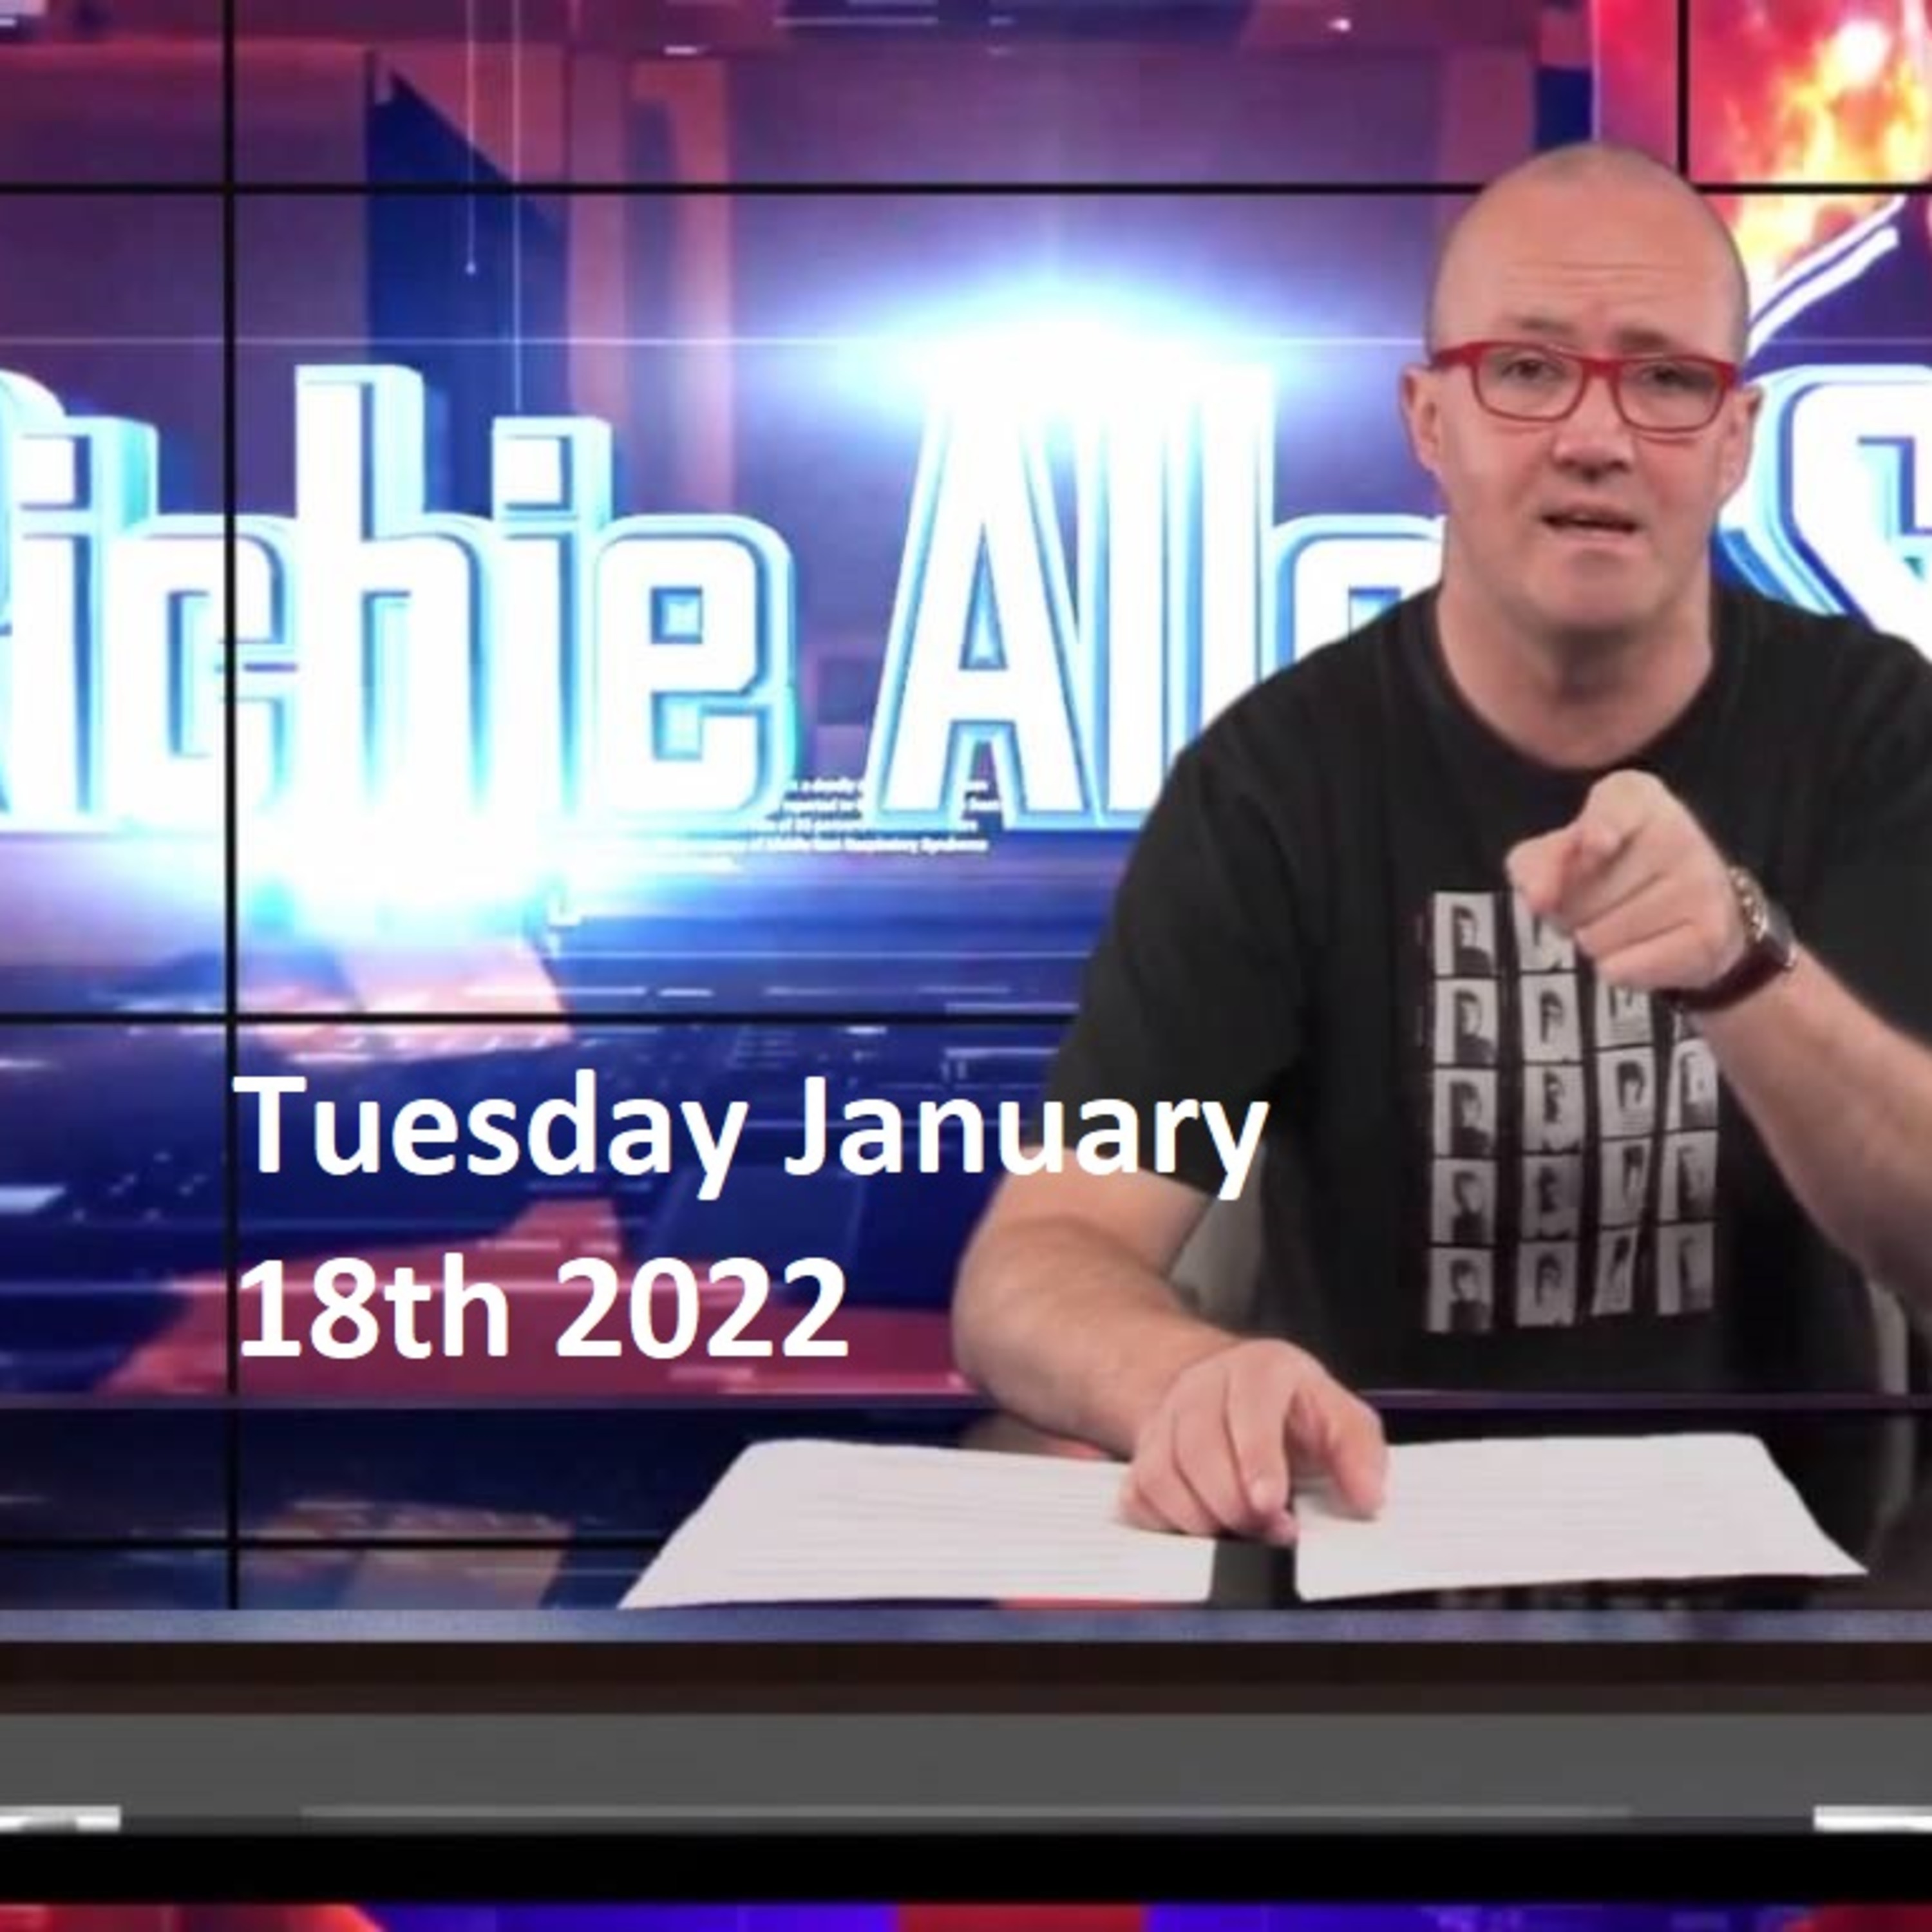 Episode 1391: The Richie Allen Show Tuesday January 18th 2022